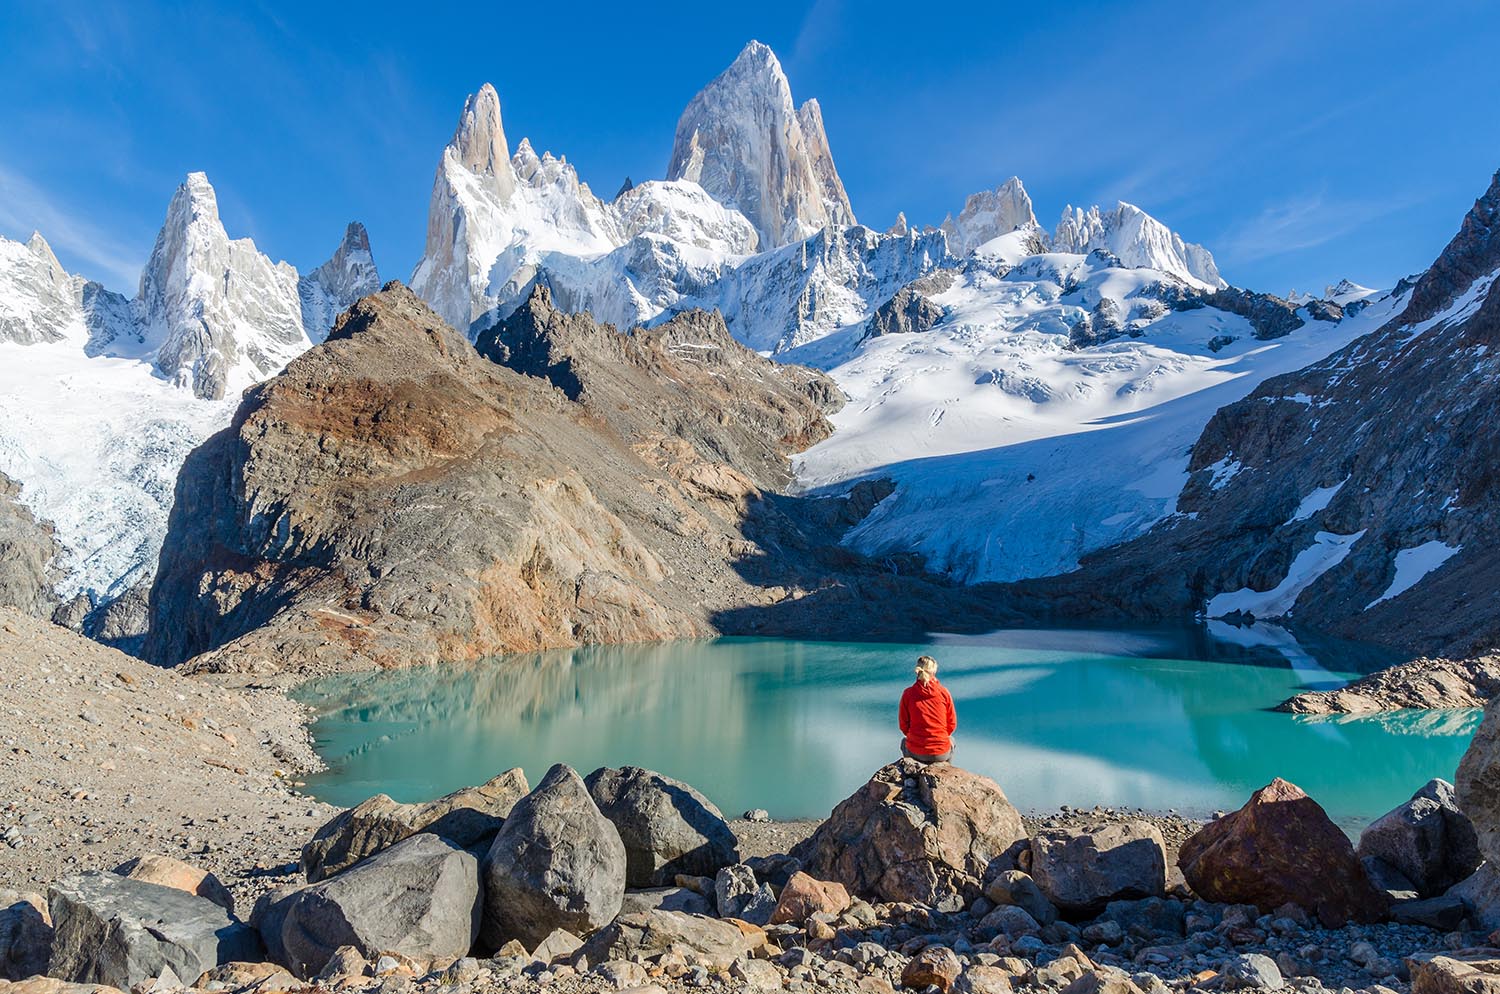 The Most Scenic Hikes Around the World • The Blonde Abroad